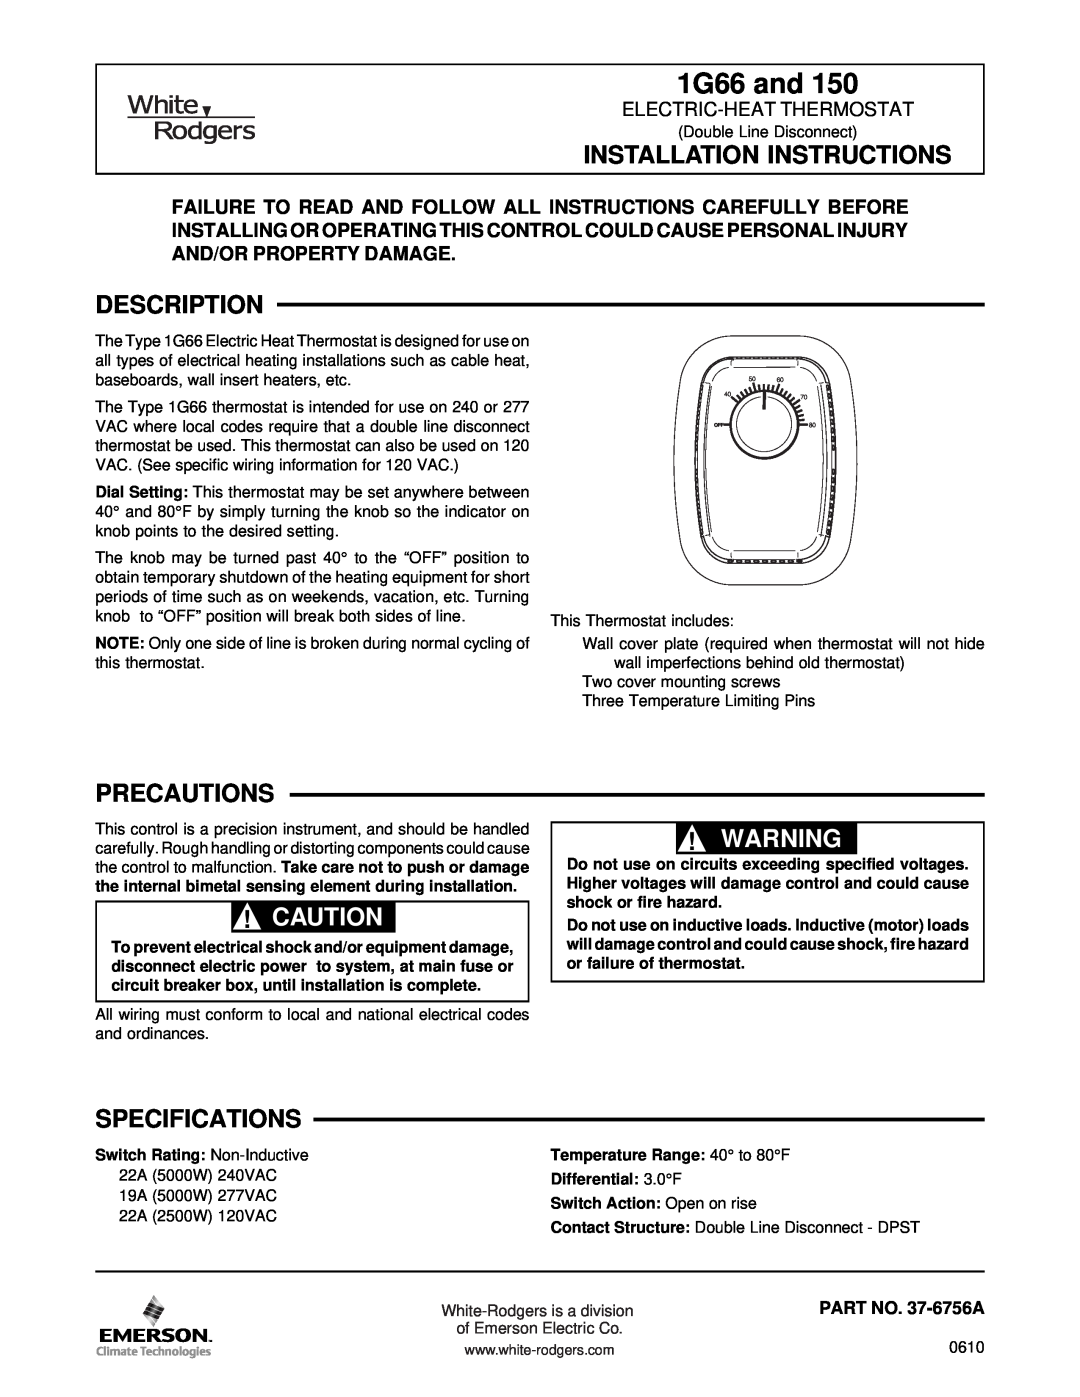 White Rodgers 150 installation instructions Installation Instructions, Description, Precautions, Specifications, 1G66 and 